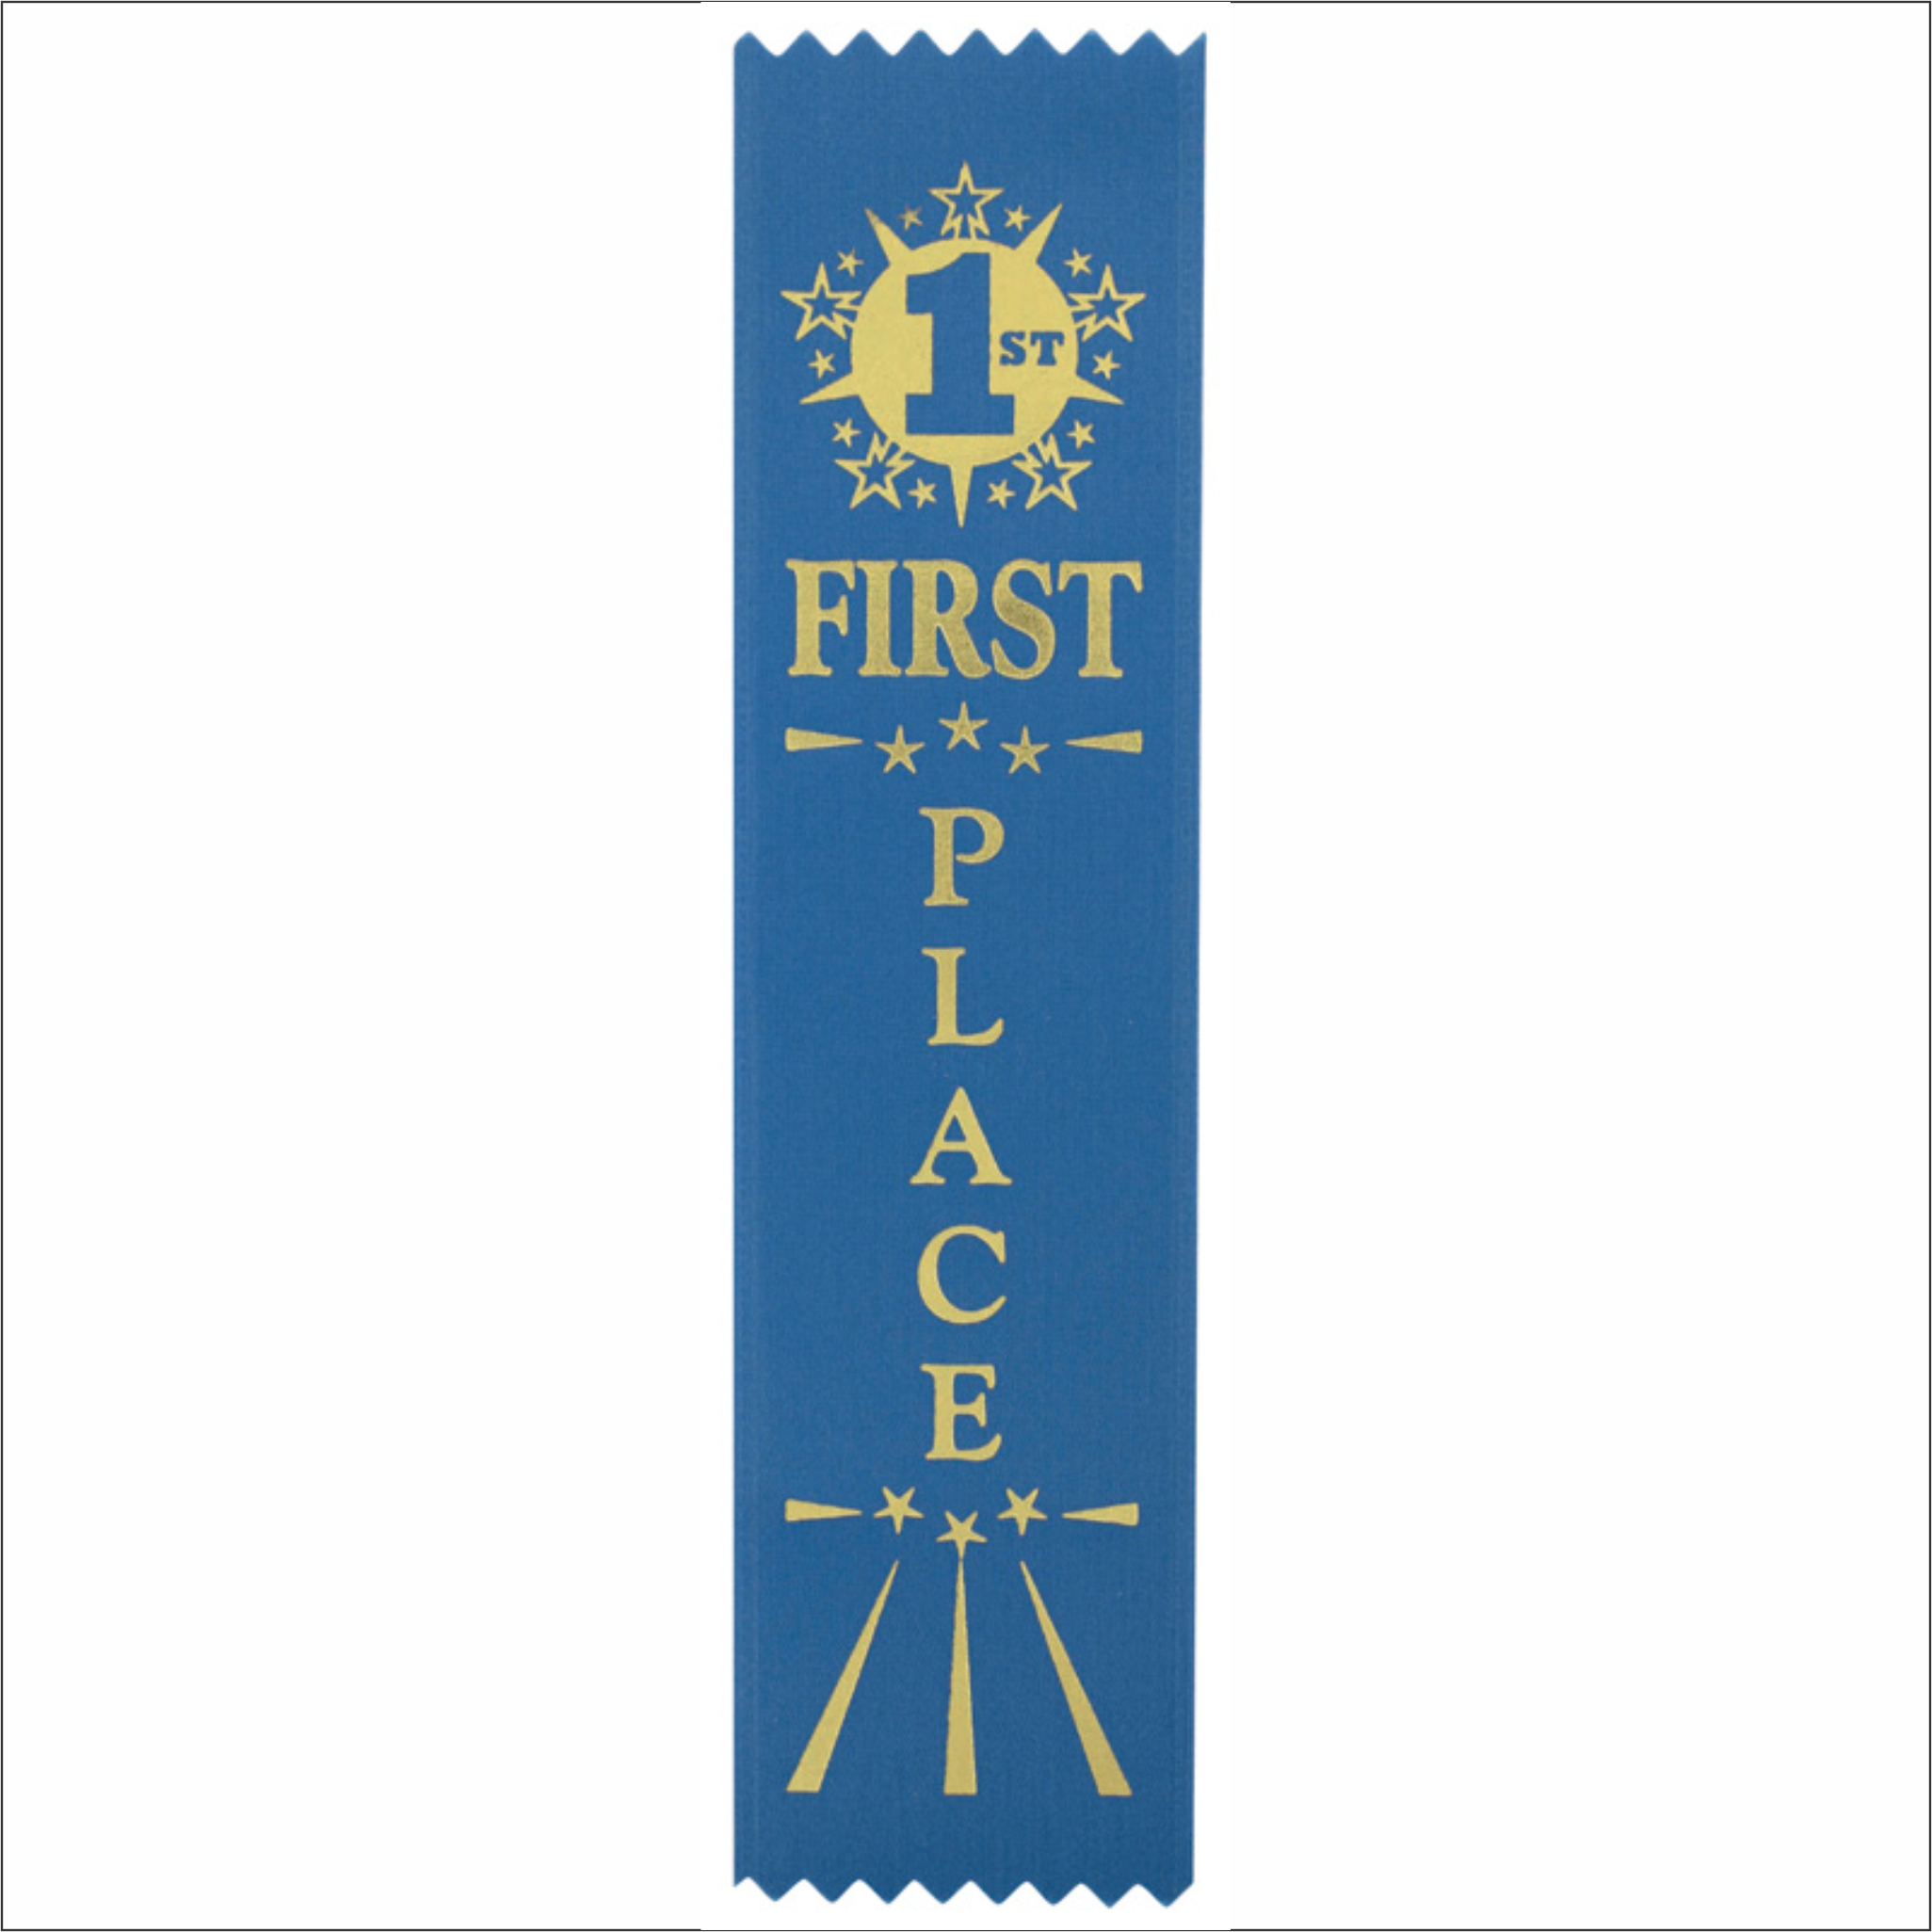 First Place Ribbons - Pack of 25 - SR-200 series